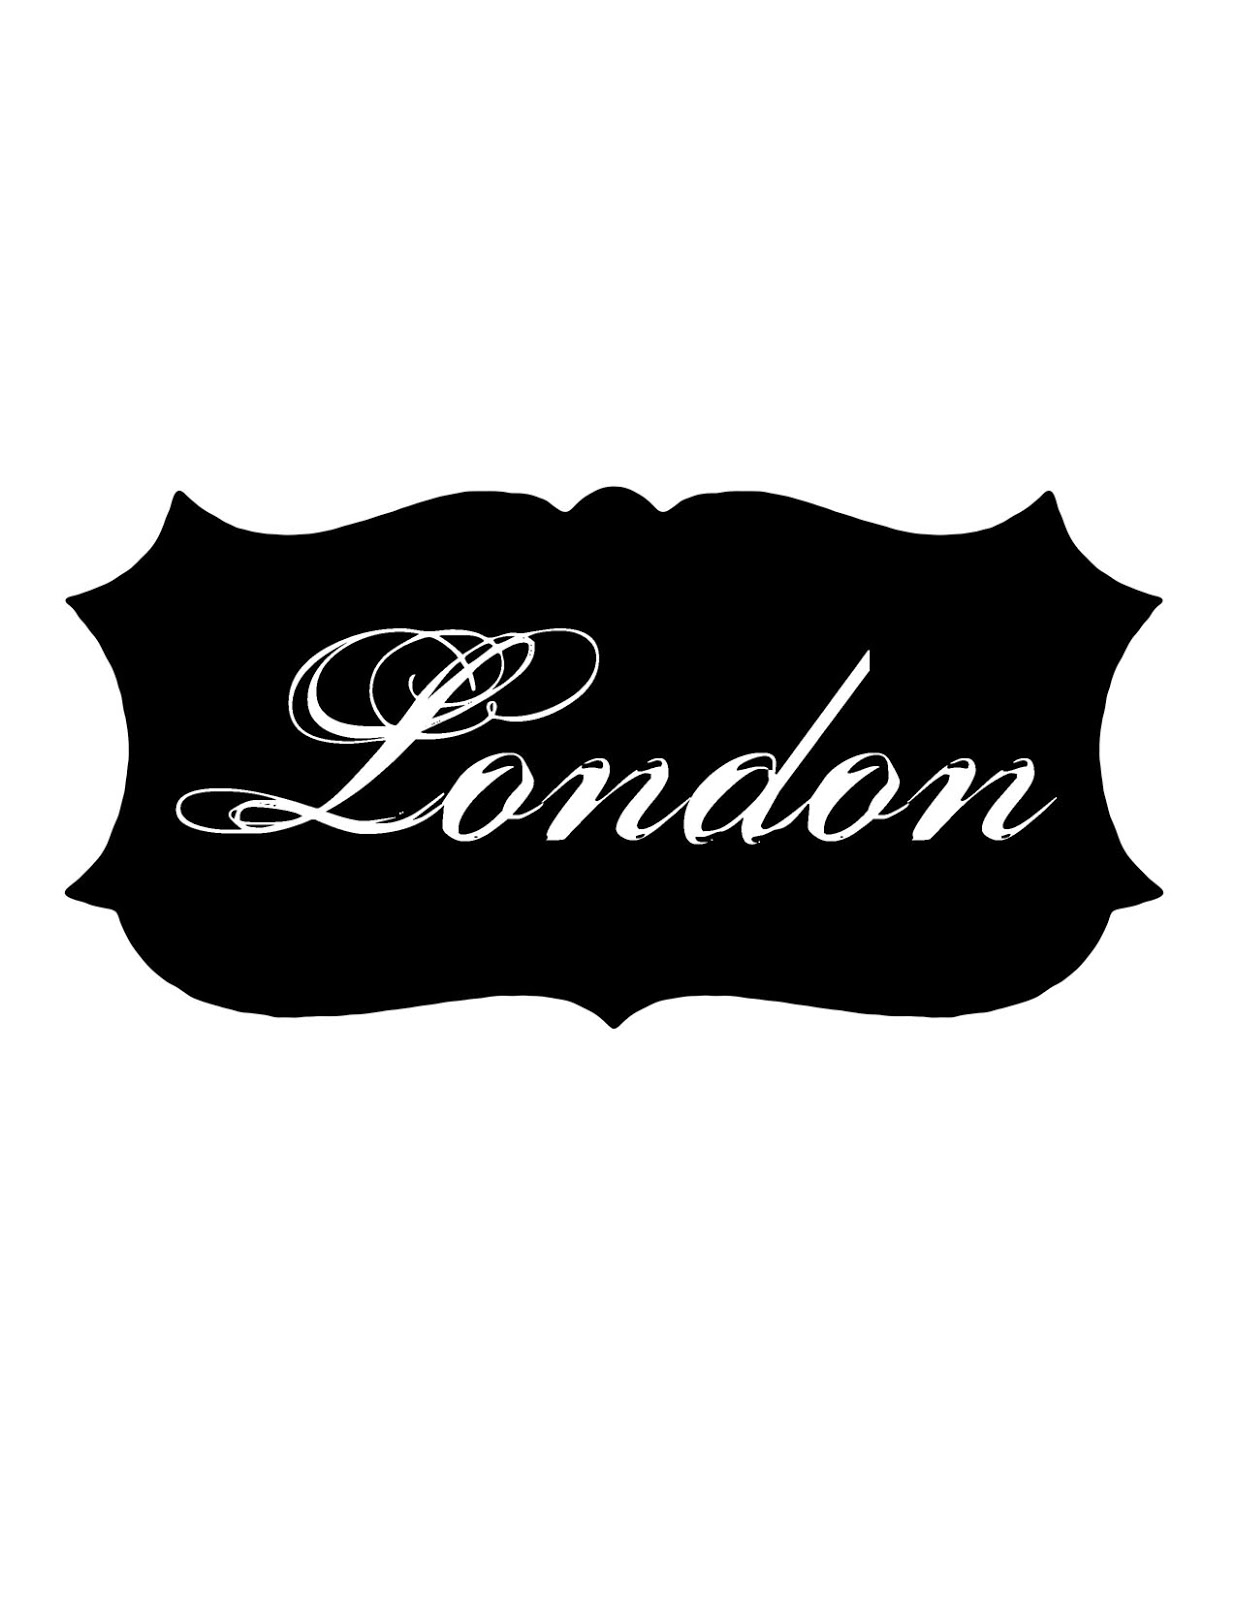 Iron on Images - London Label - The Graphics Fairy